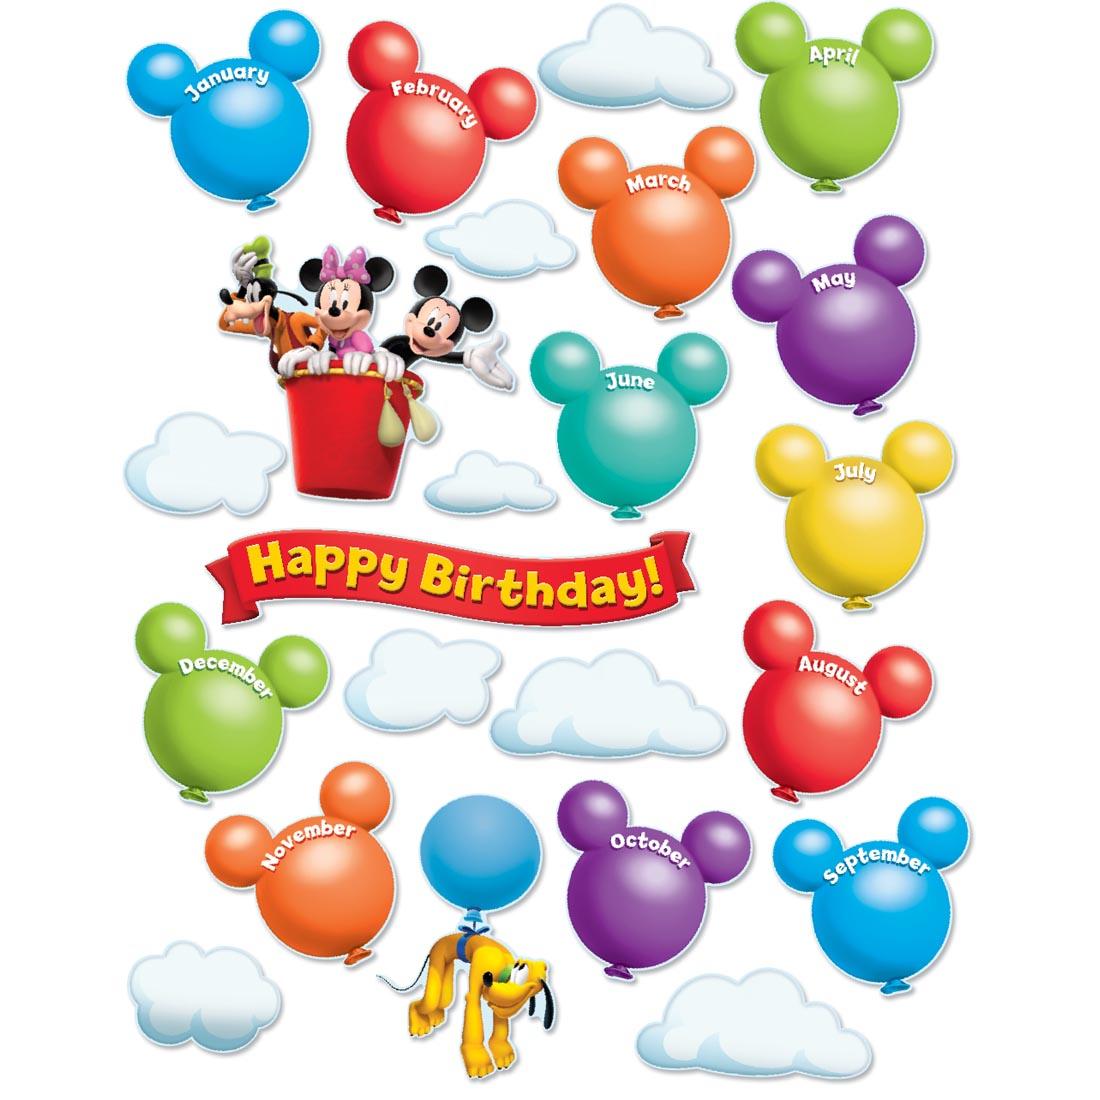 Mickey Mouse Clubhouse Birthday Bulletin Board Set by Eureka